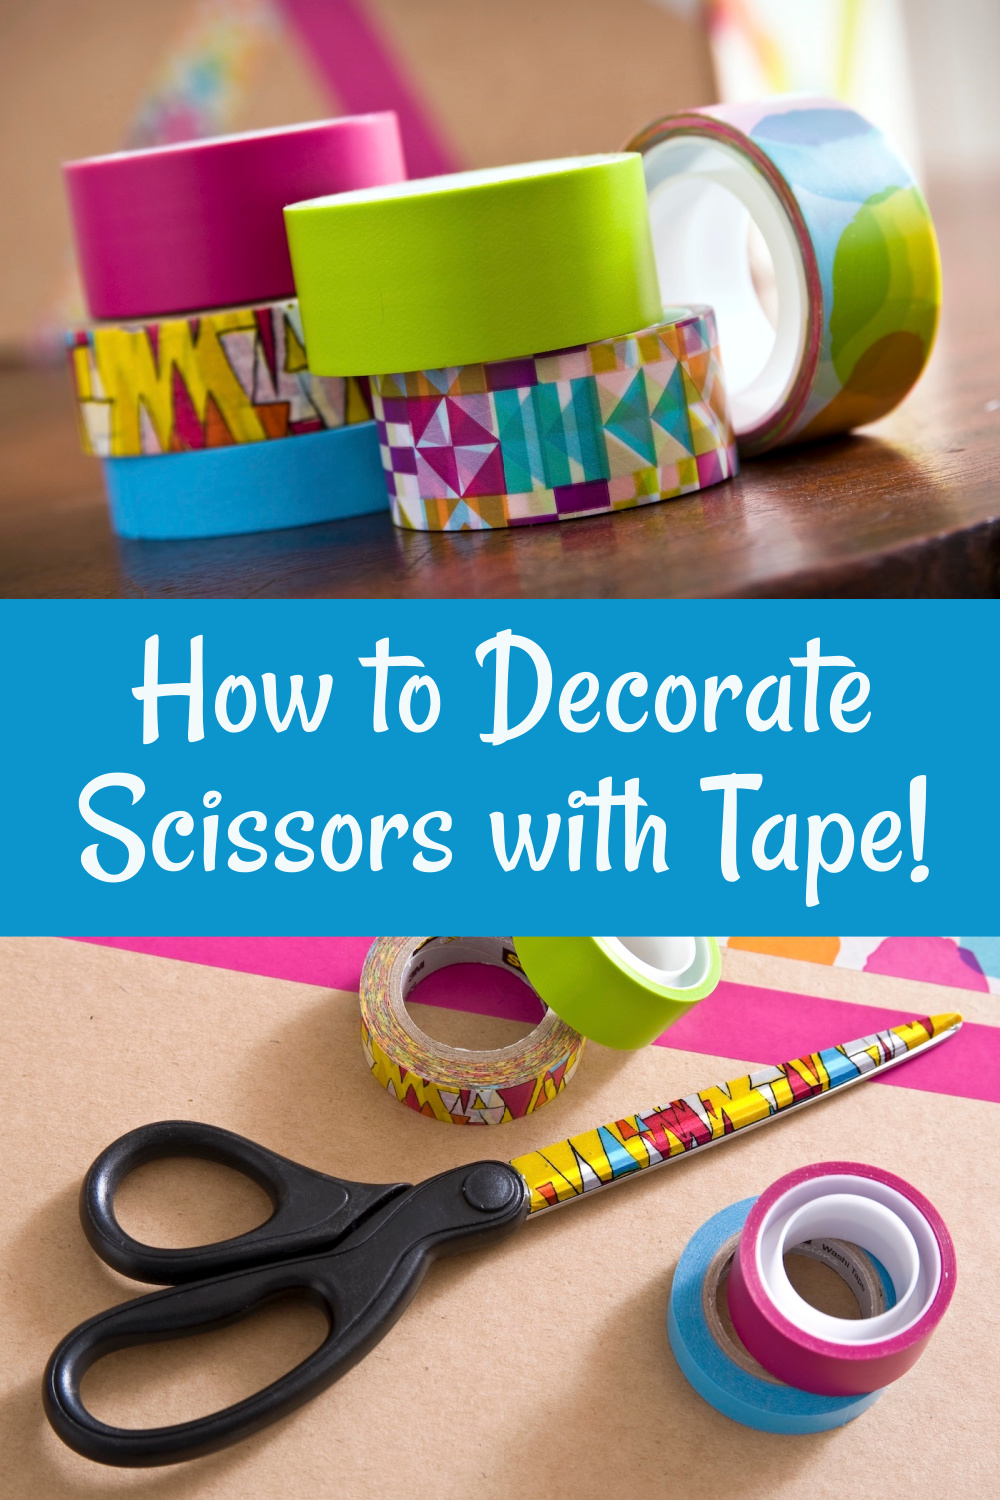 Decorate Scissors with washi tape